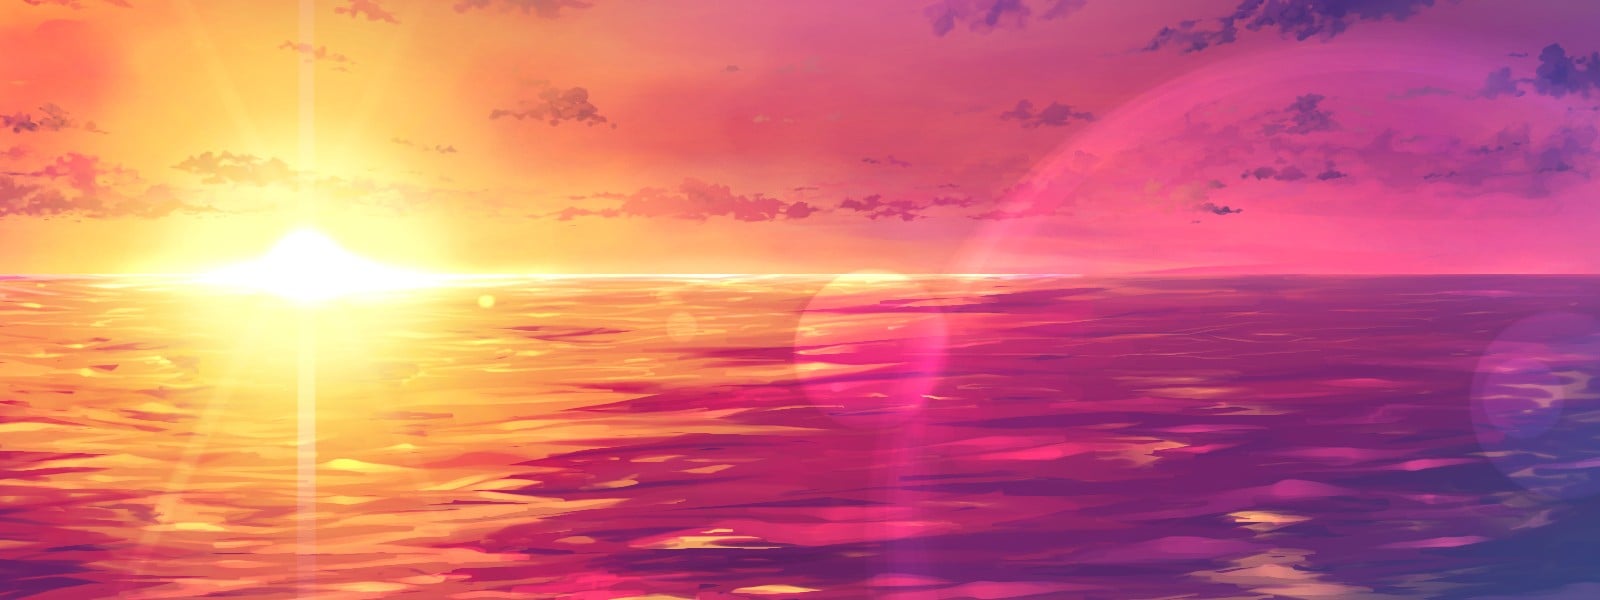 Pink Sunset Backgrounds   HD Wallpapers